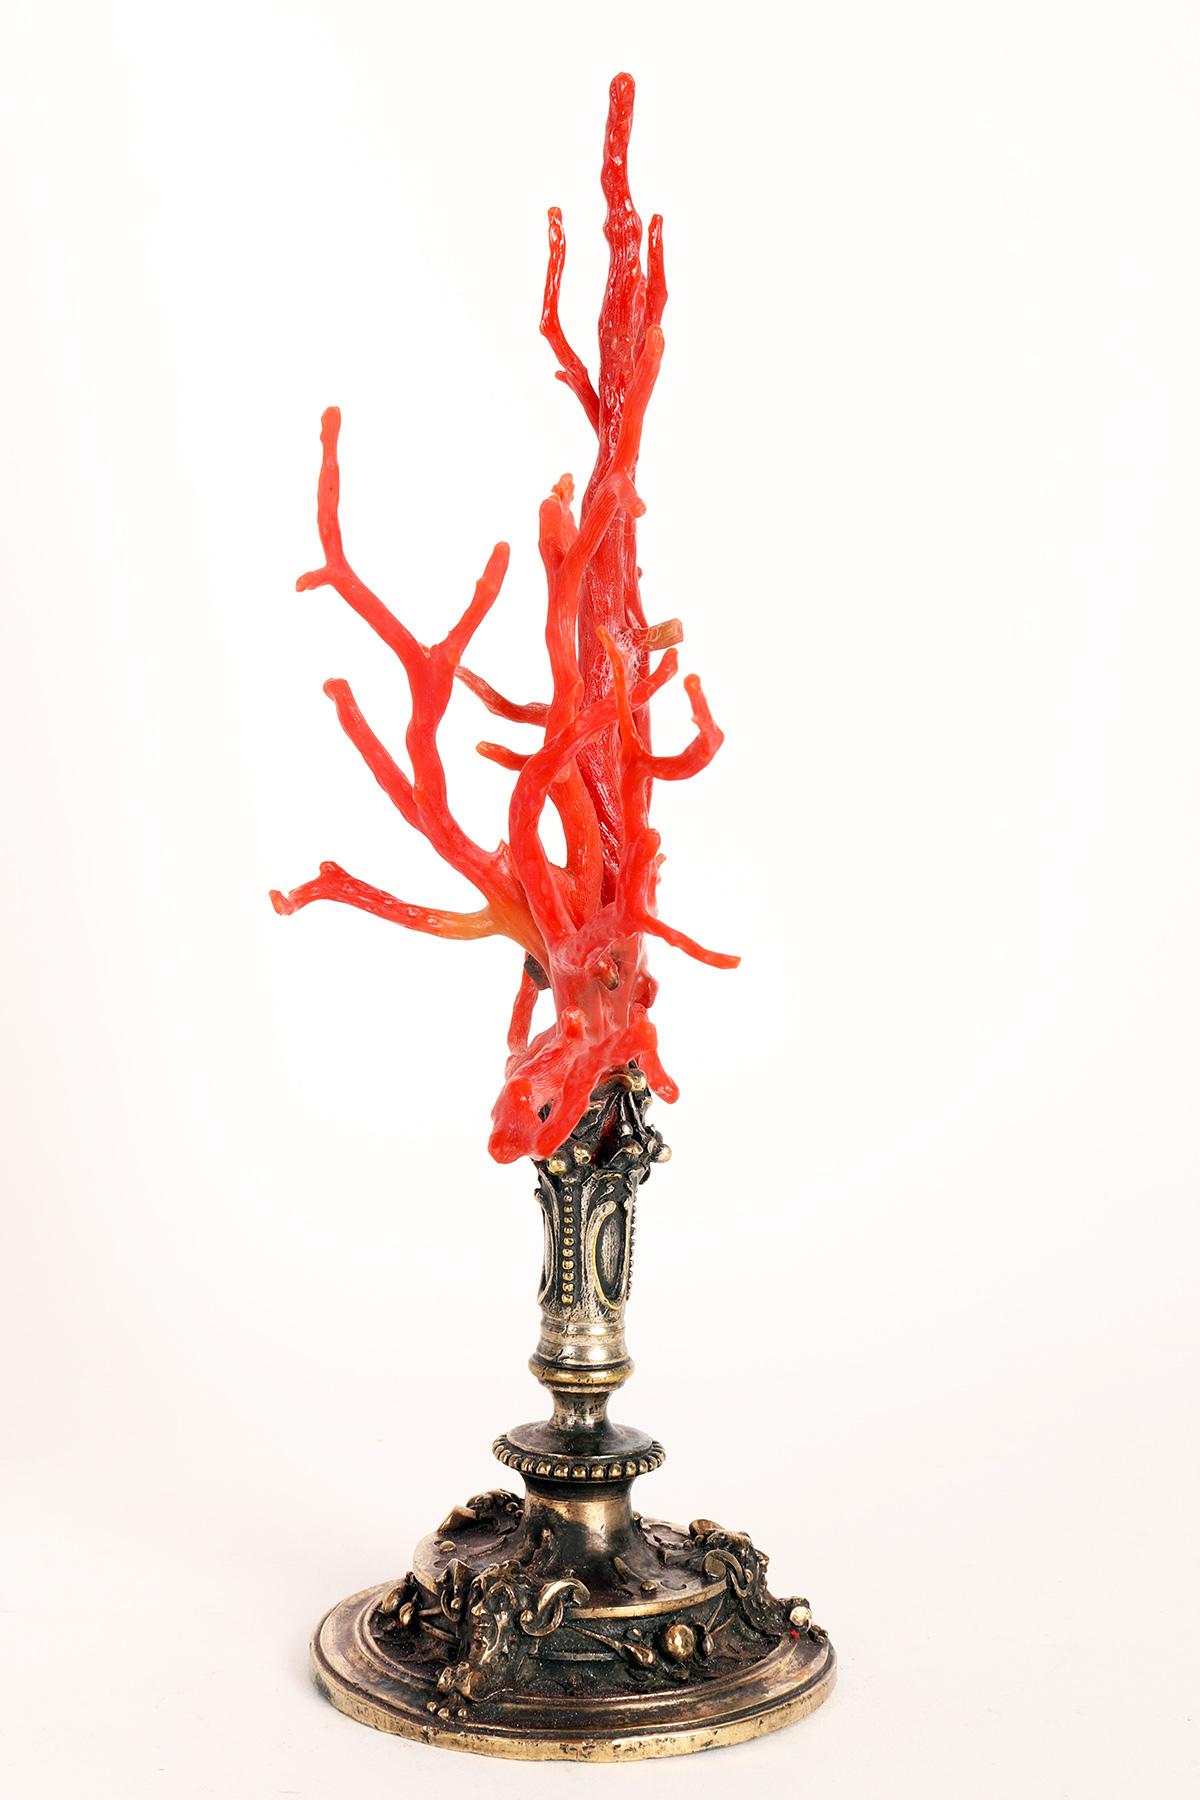 19th Century Coral Branch from Wunderkammer, Caltagirone, Sicily, Italy 1820